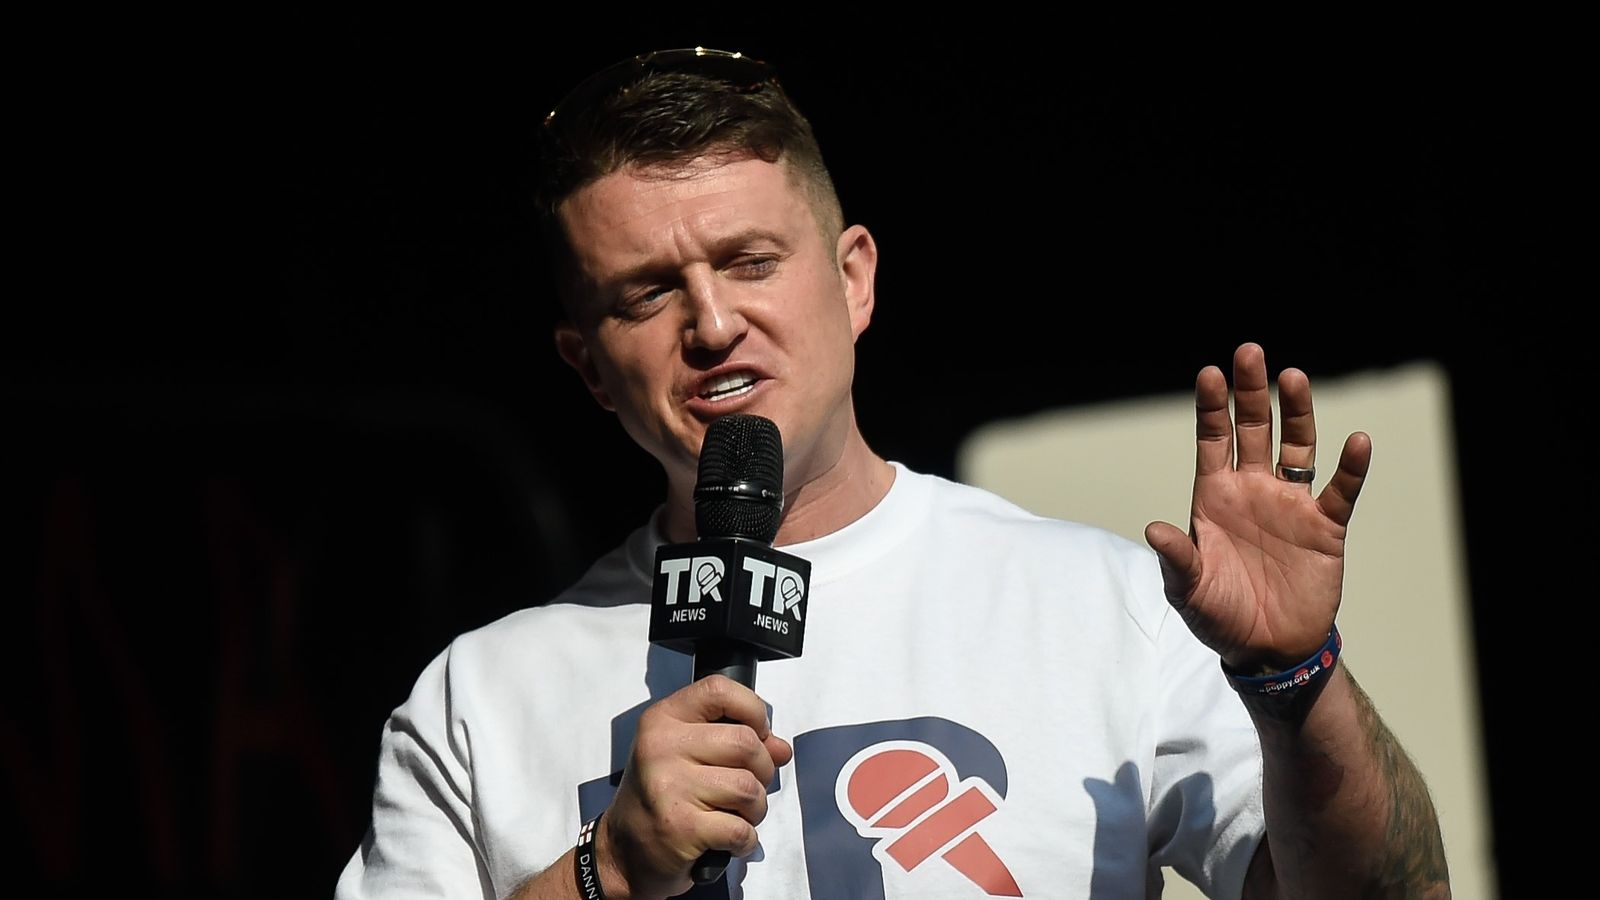 tommy robinson panorama video